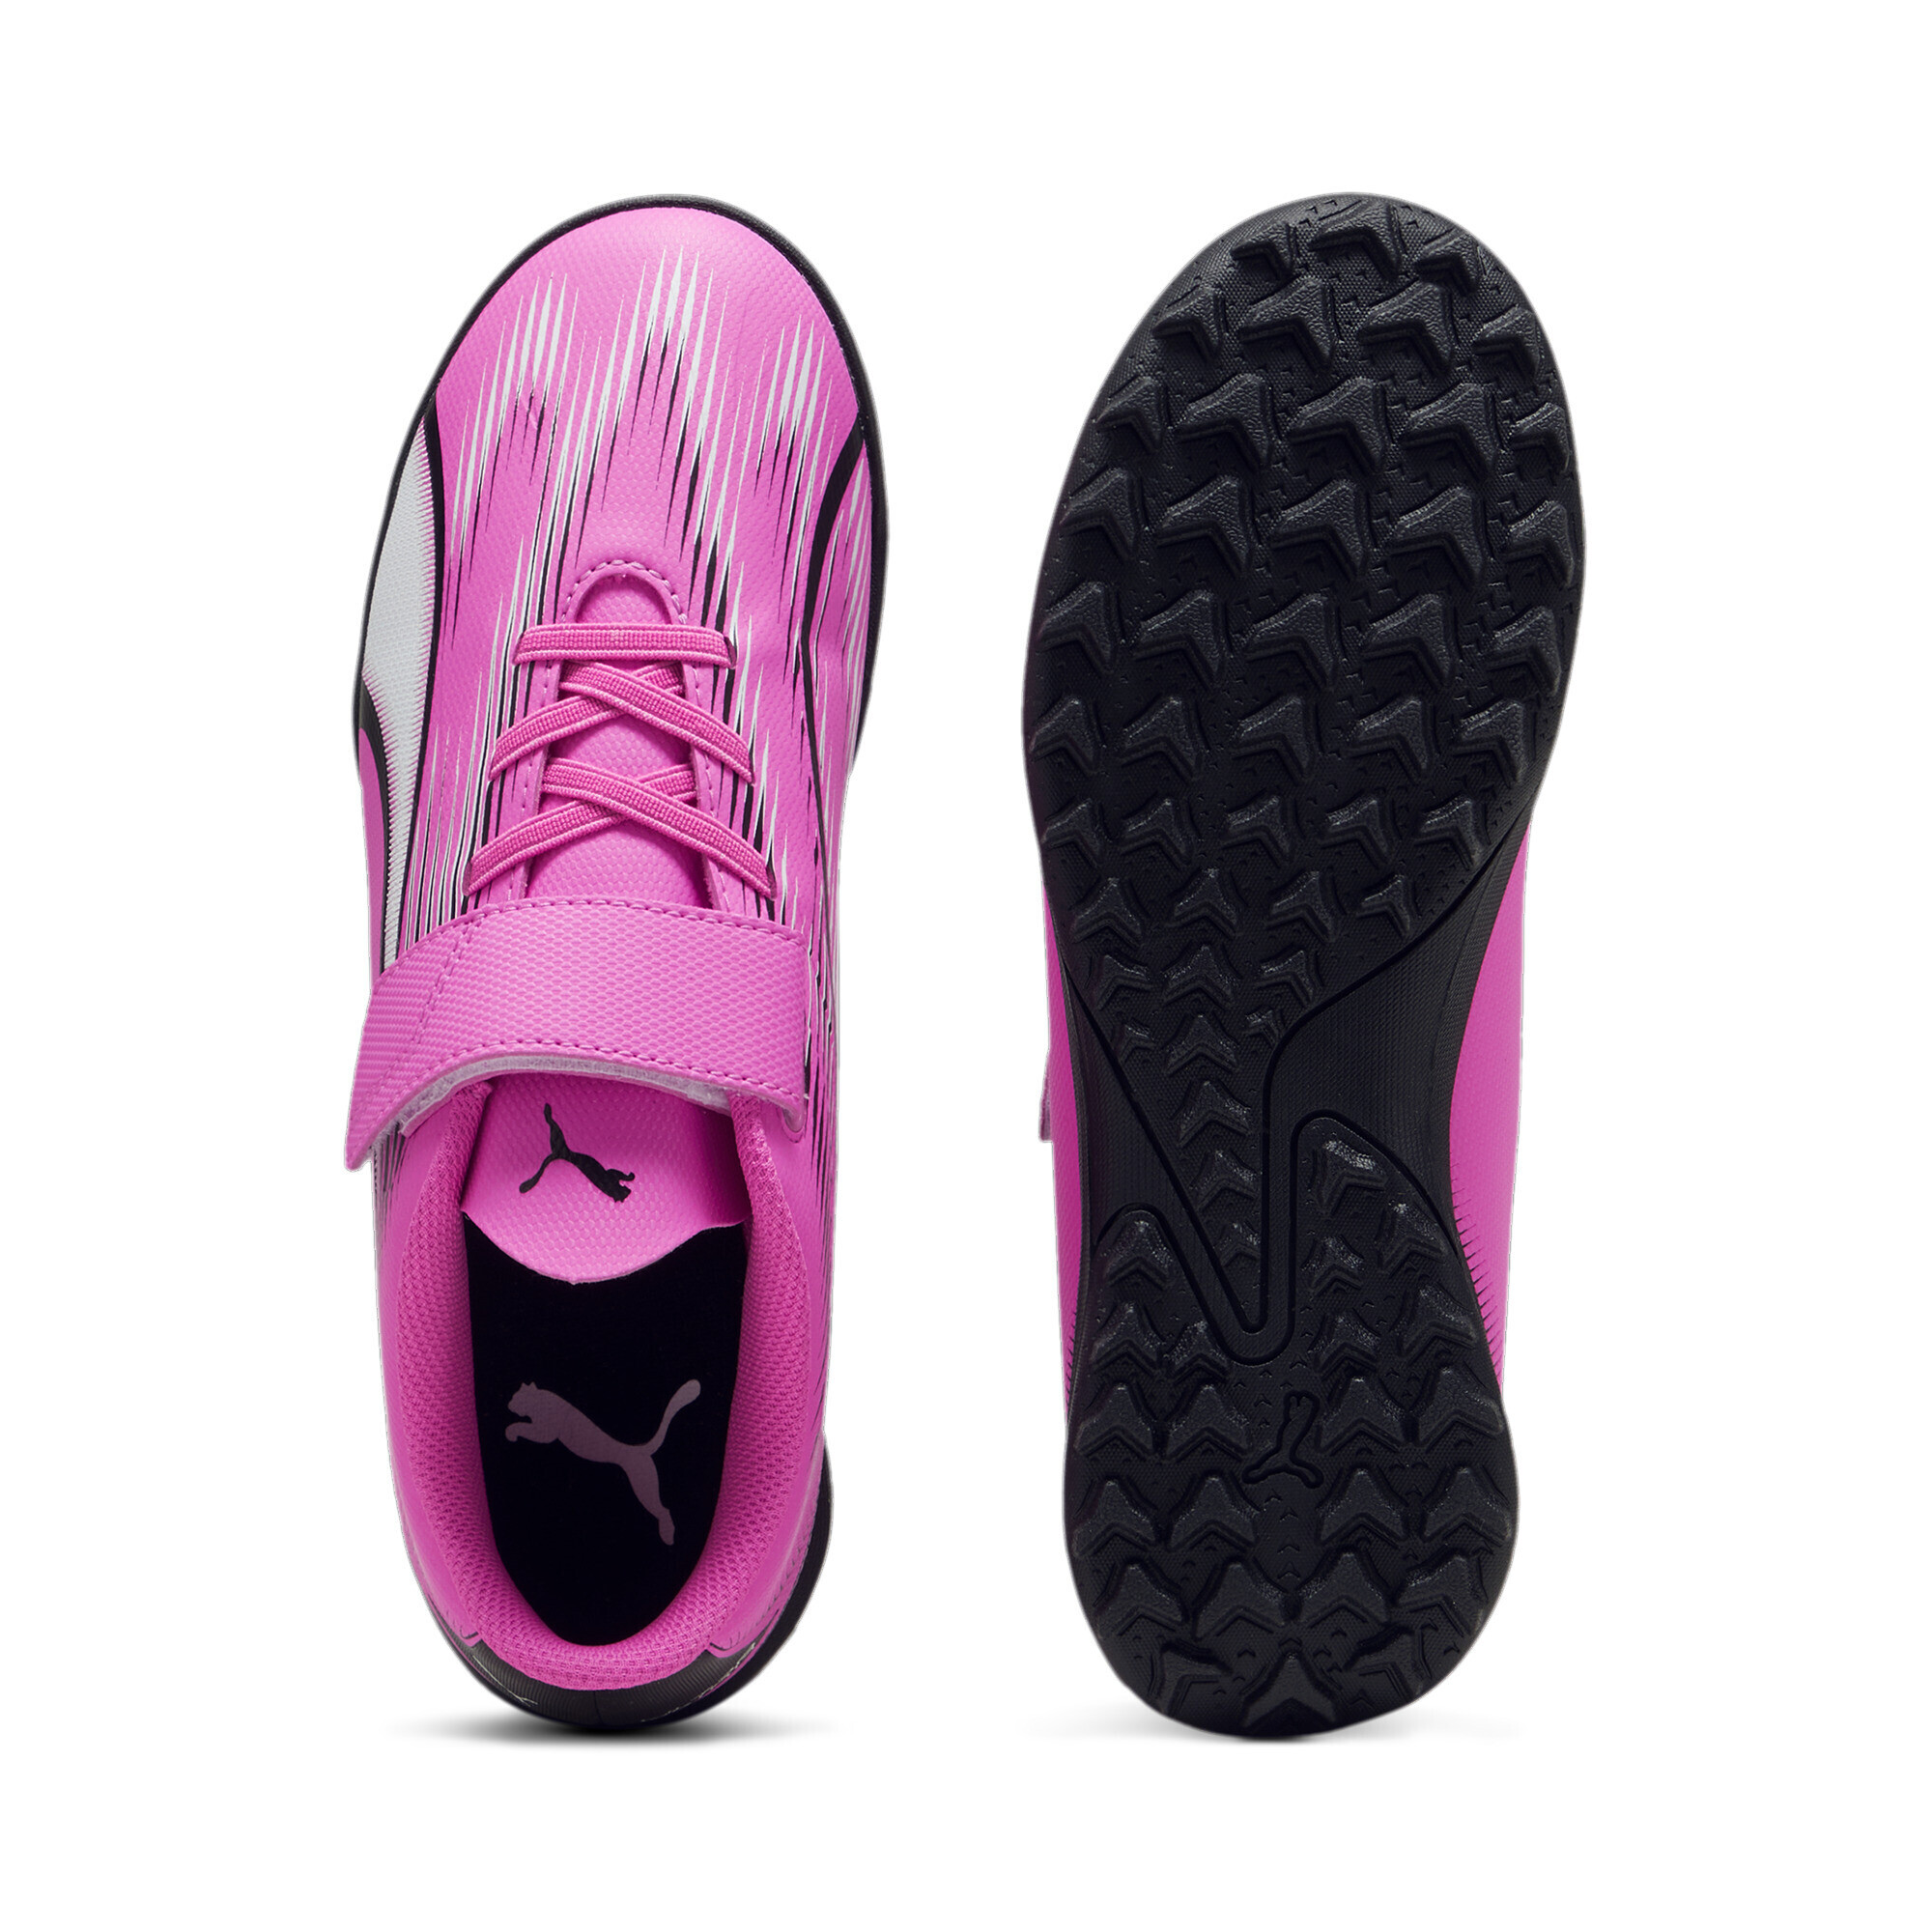 PUMA ULTRA PLAY TT Youth Football Boots In Pink, Size EU 34.5